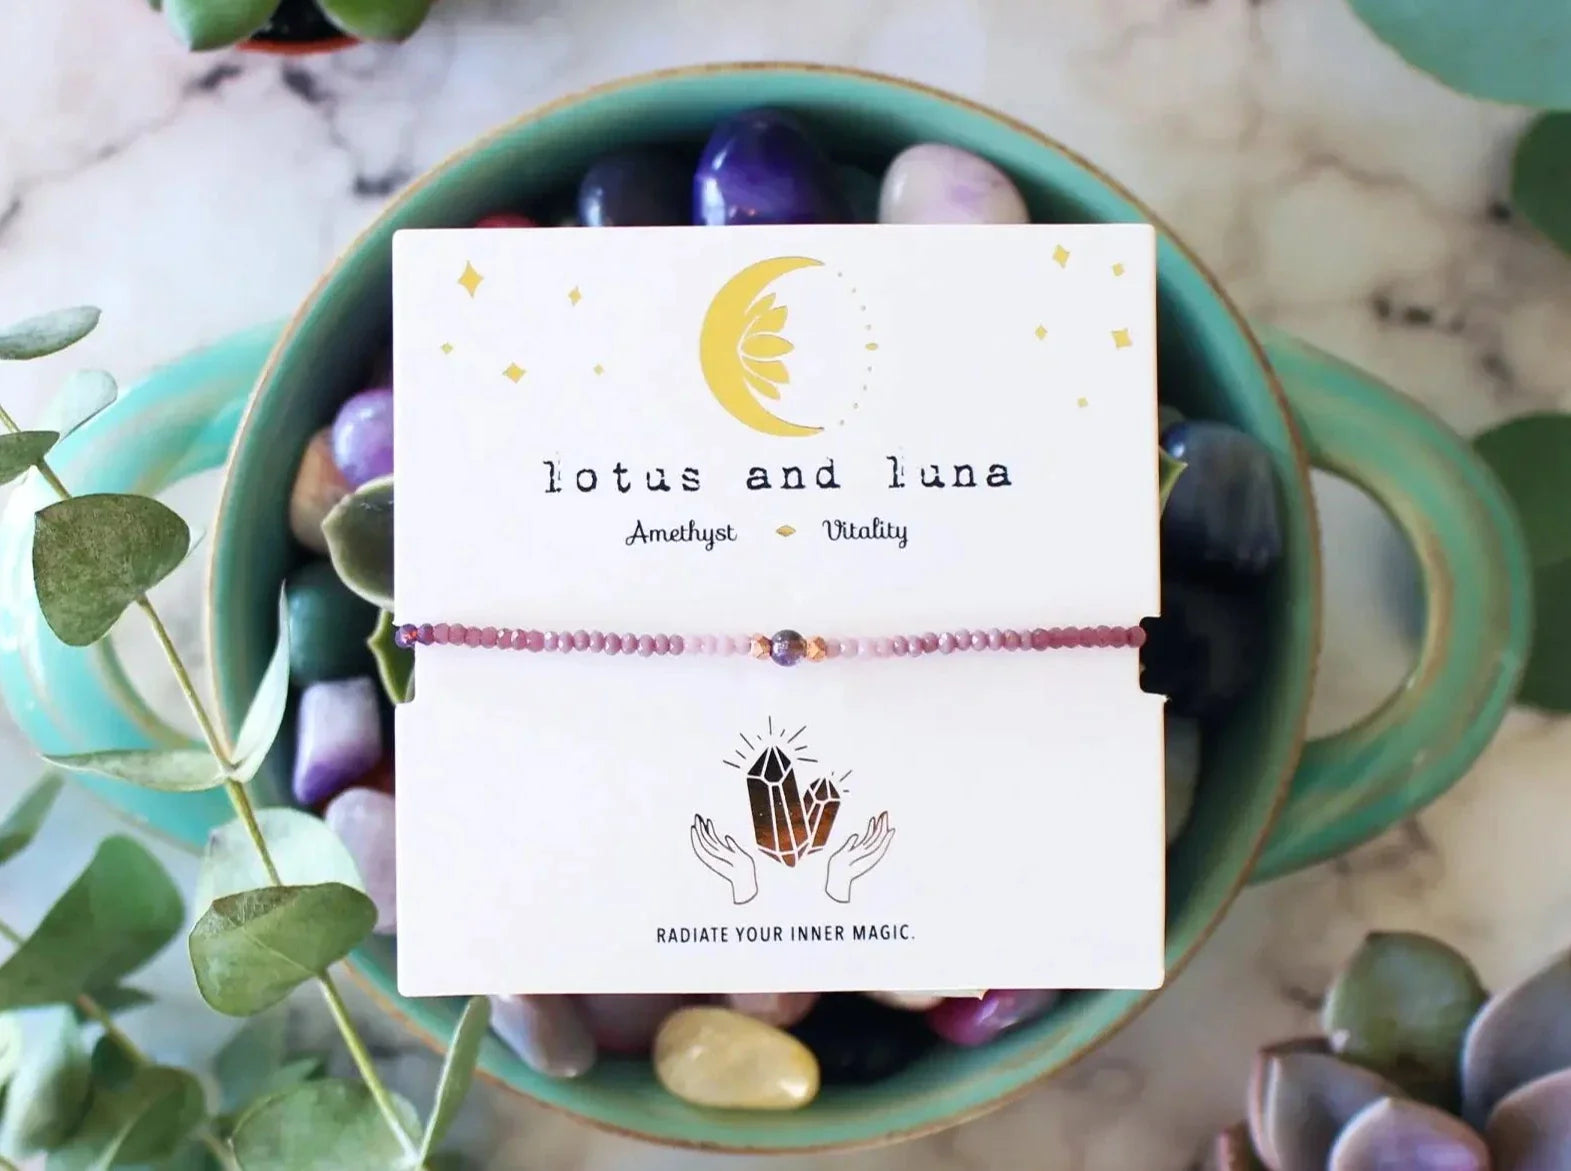 Purple Amethyst and Crystal Stone Goddess Bracelet from Lotus and Luna